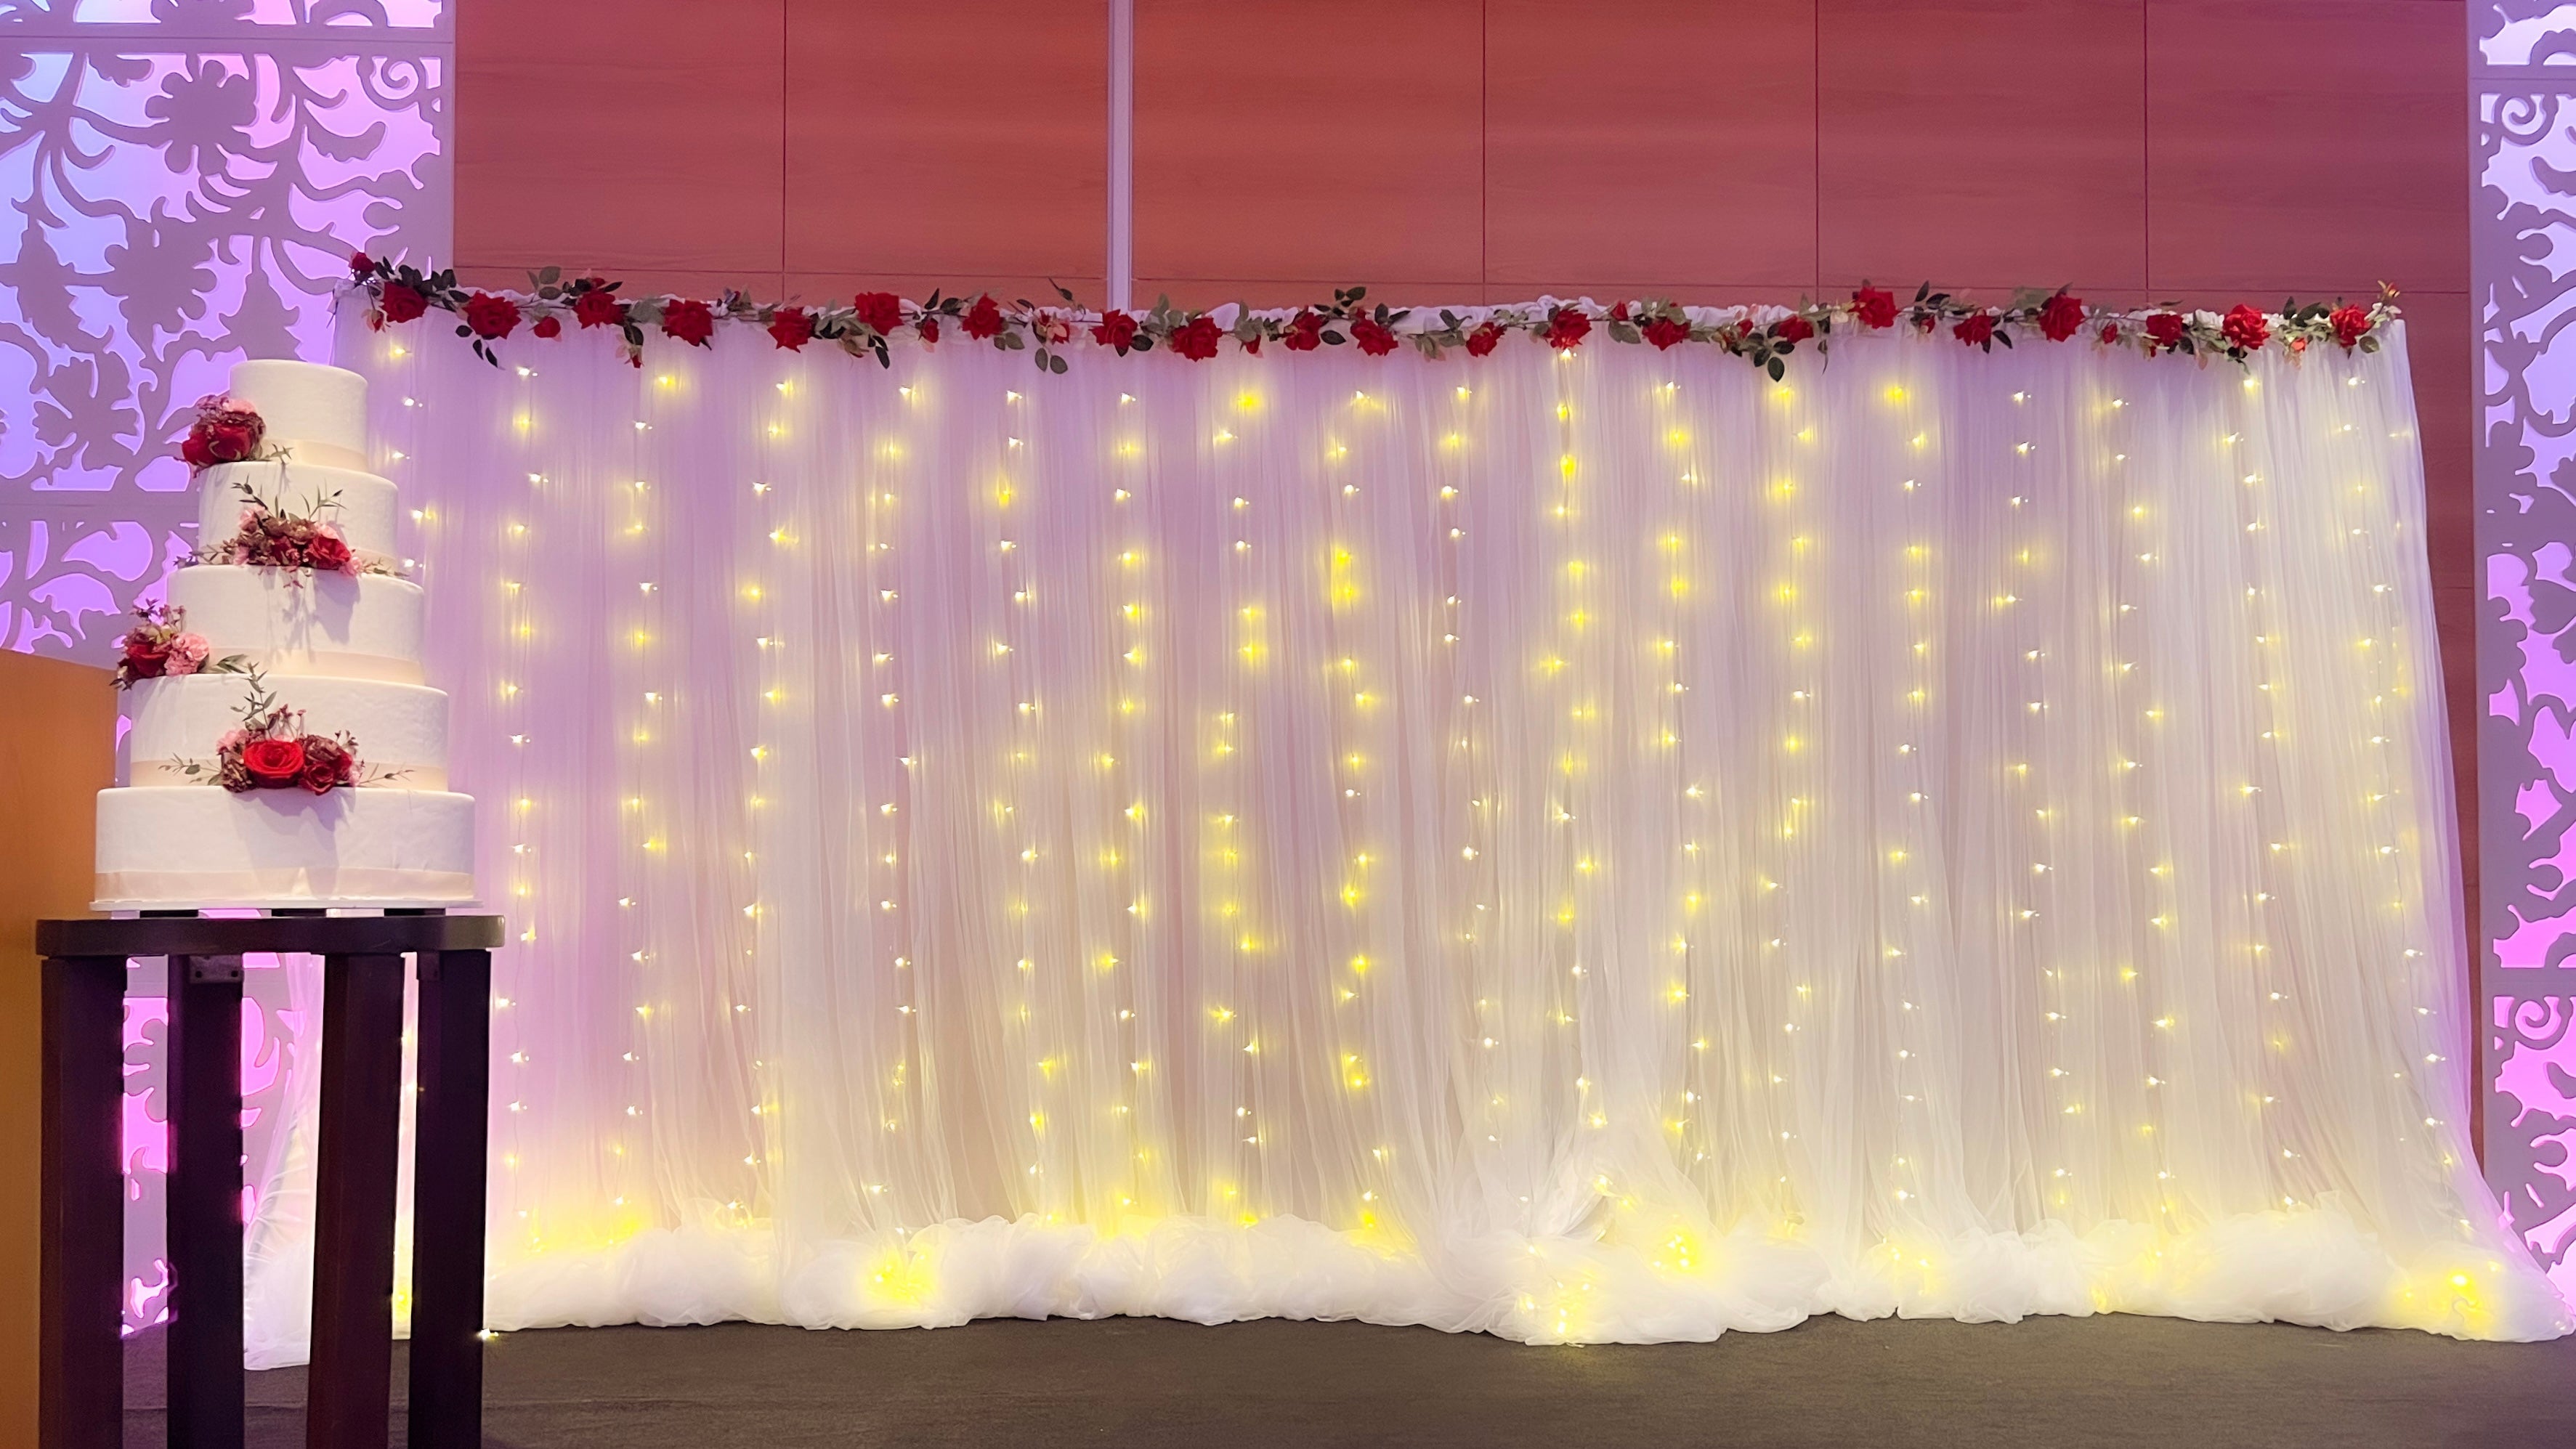 Wedding Stage Decor in Singapore - 6m White Backdrop with Fairylights & Red Floral Veins 